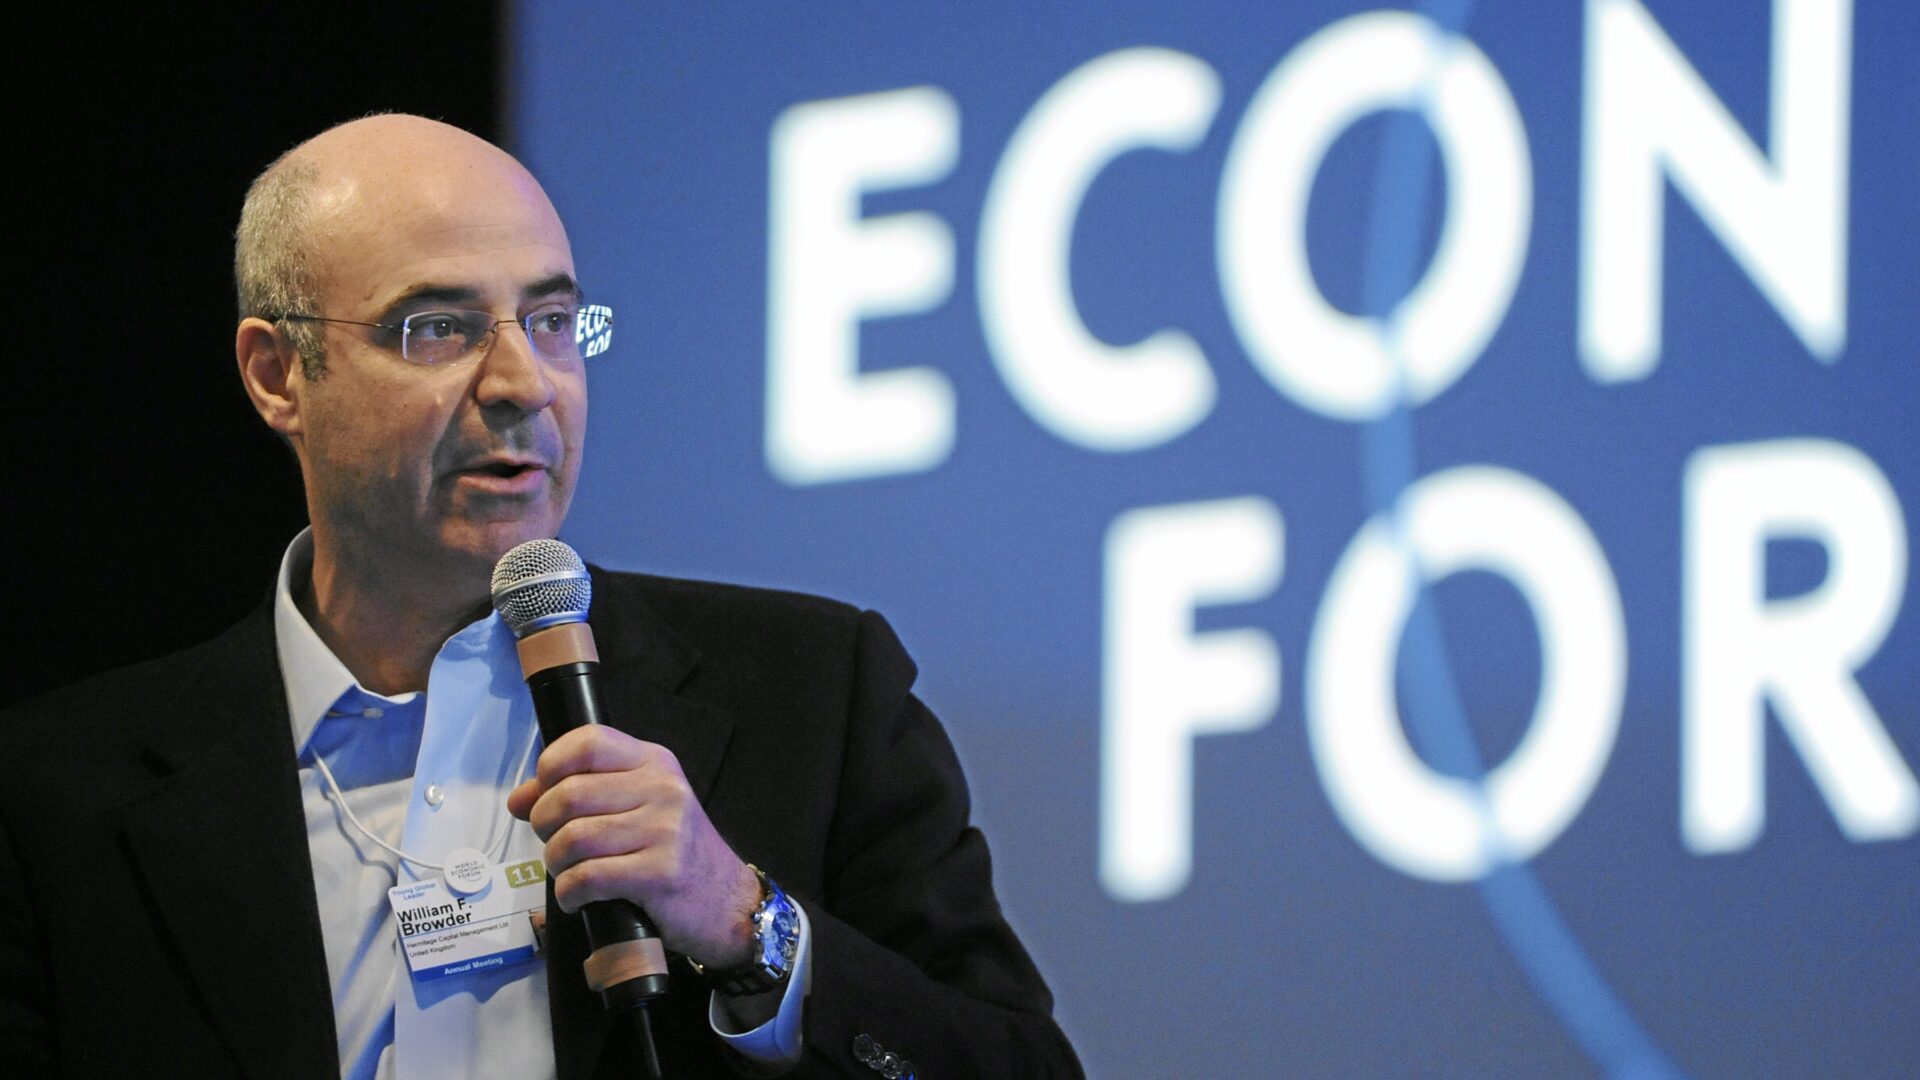 World Economic Forum from Cologny, Switzerland / CC BY-SA 2.0 / Wikimedia Commons